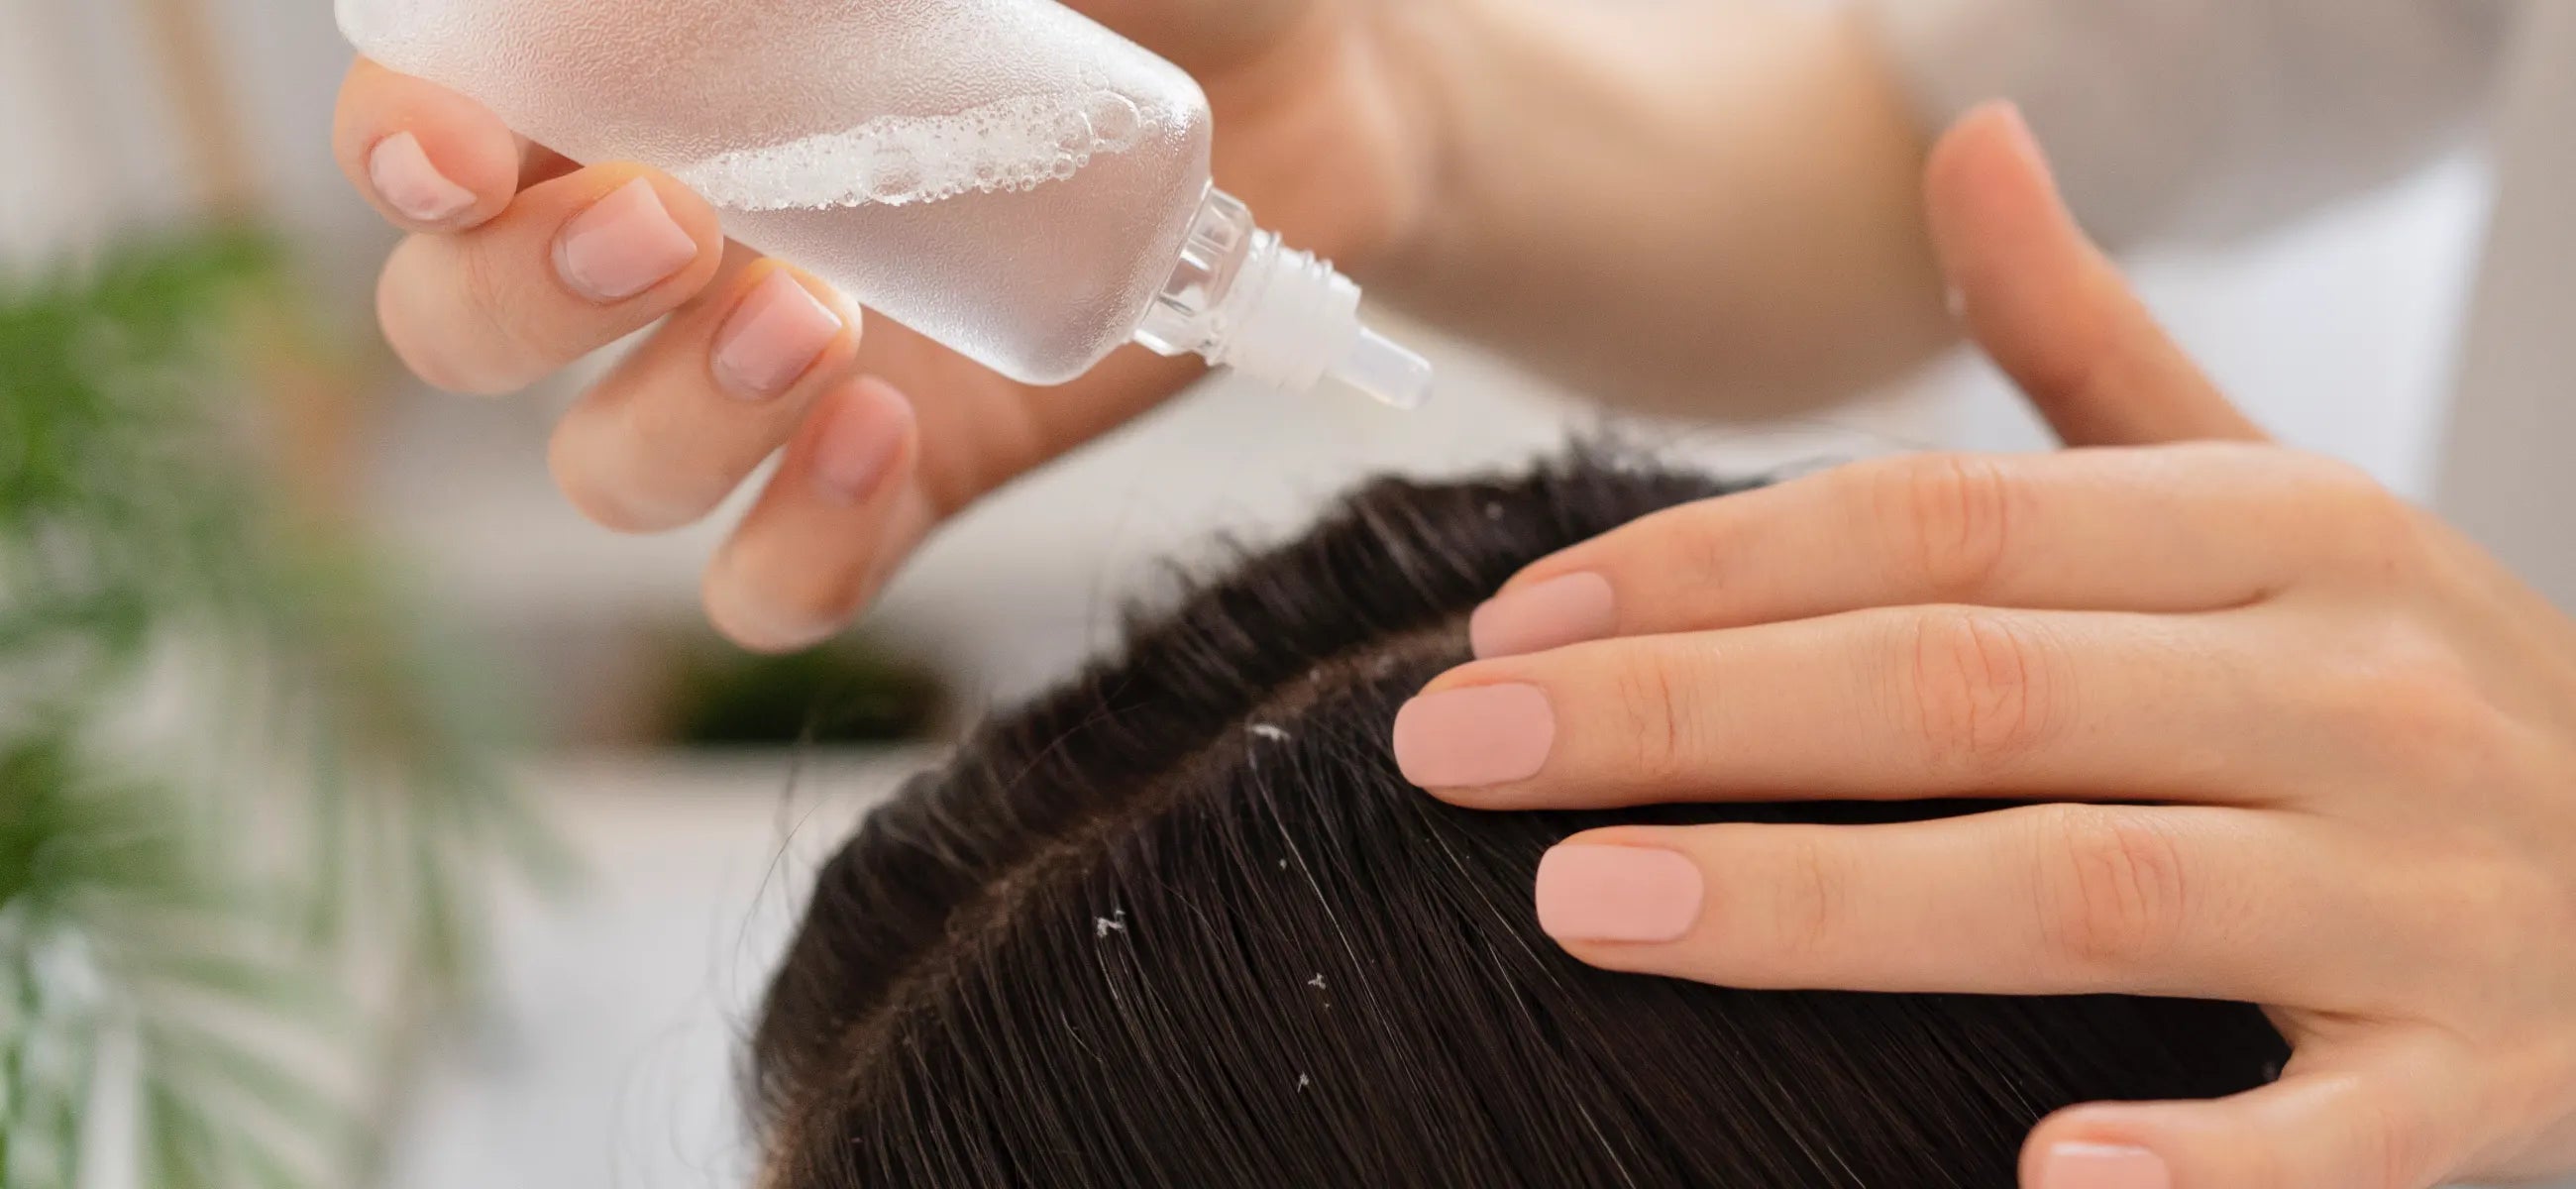 What is the right Dandruff treatment for me?